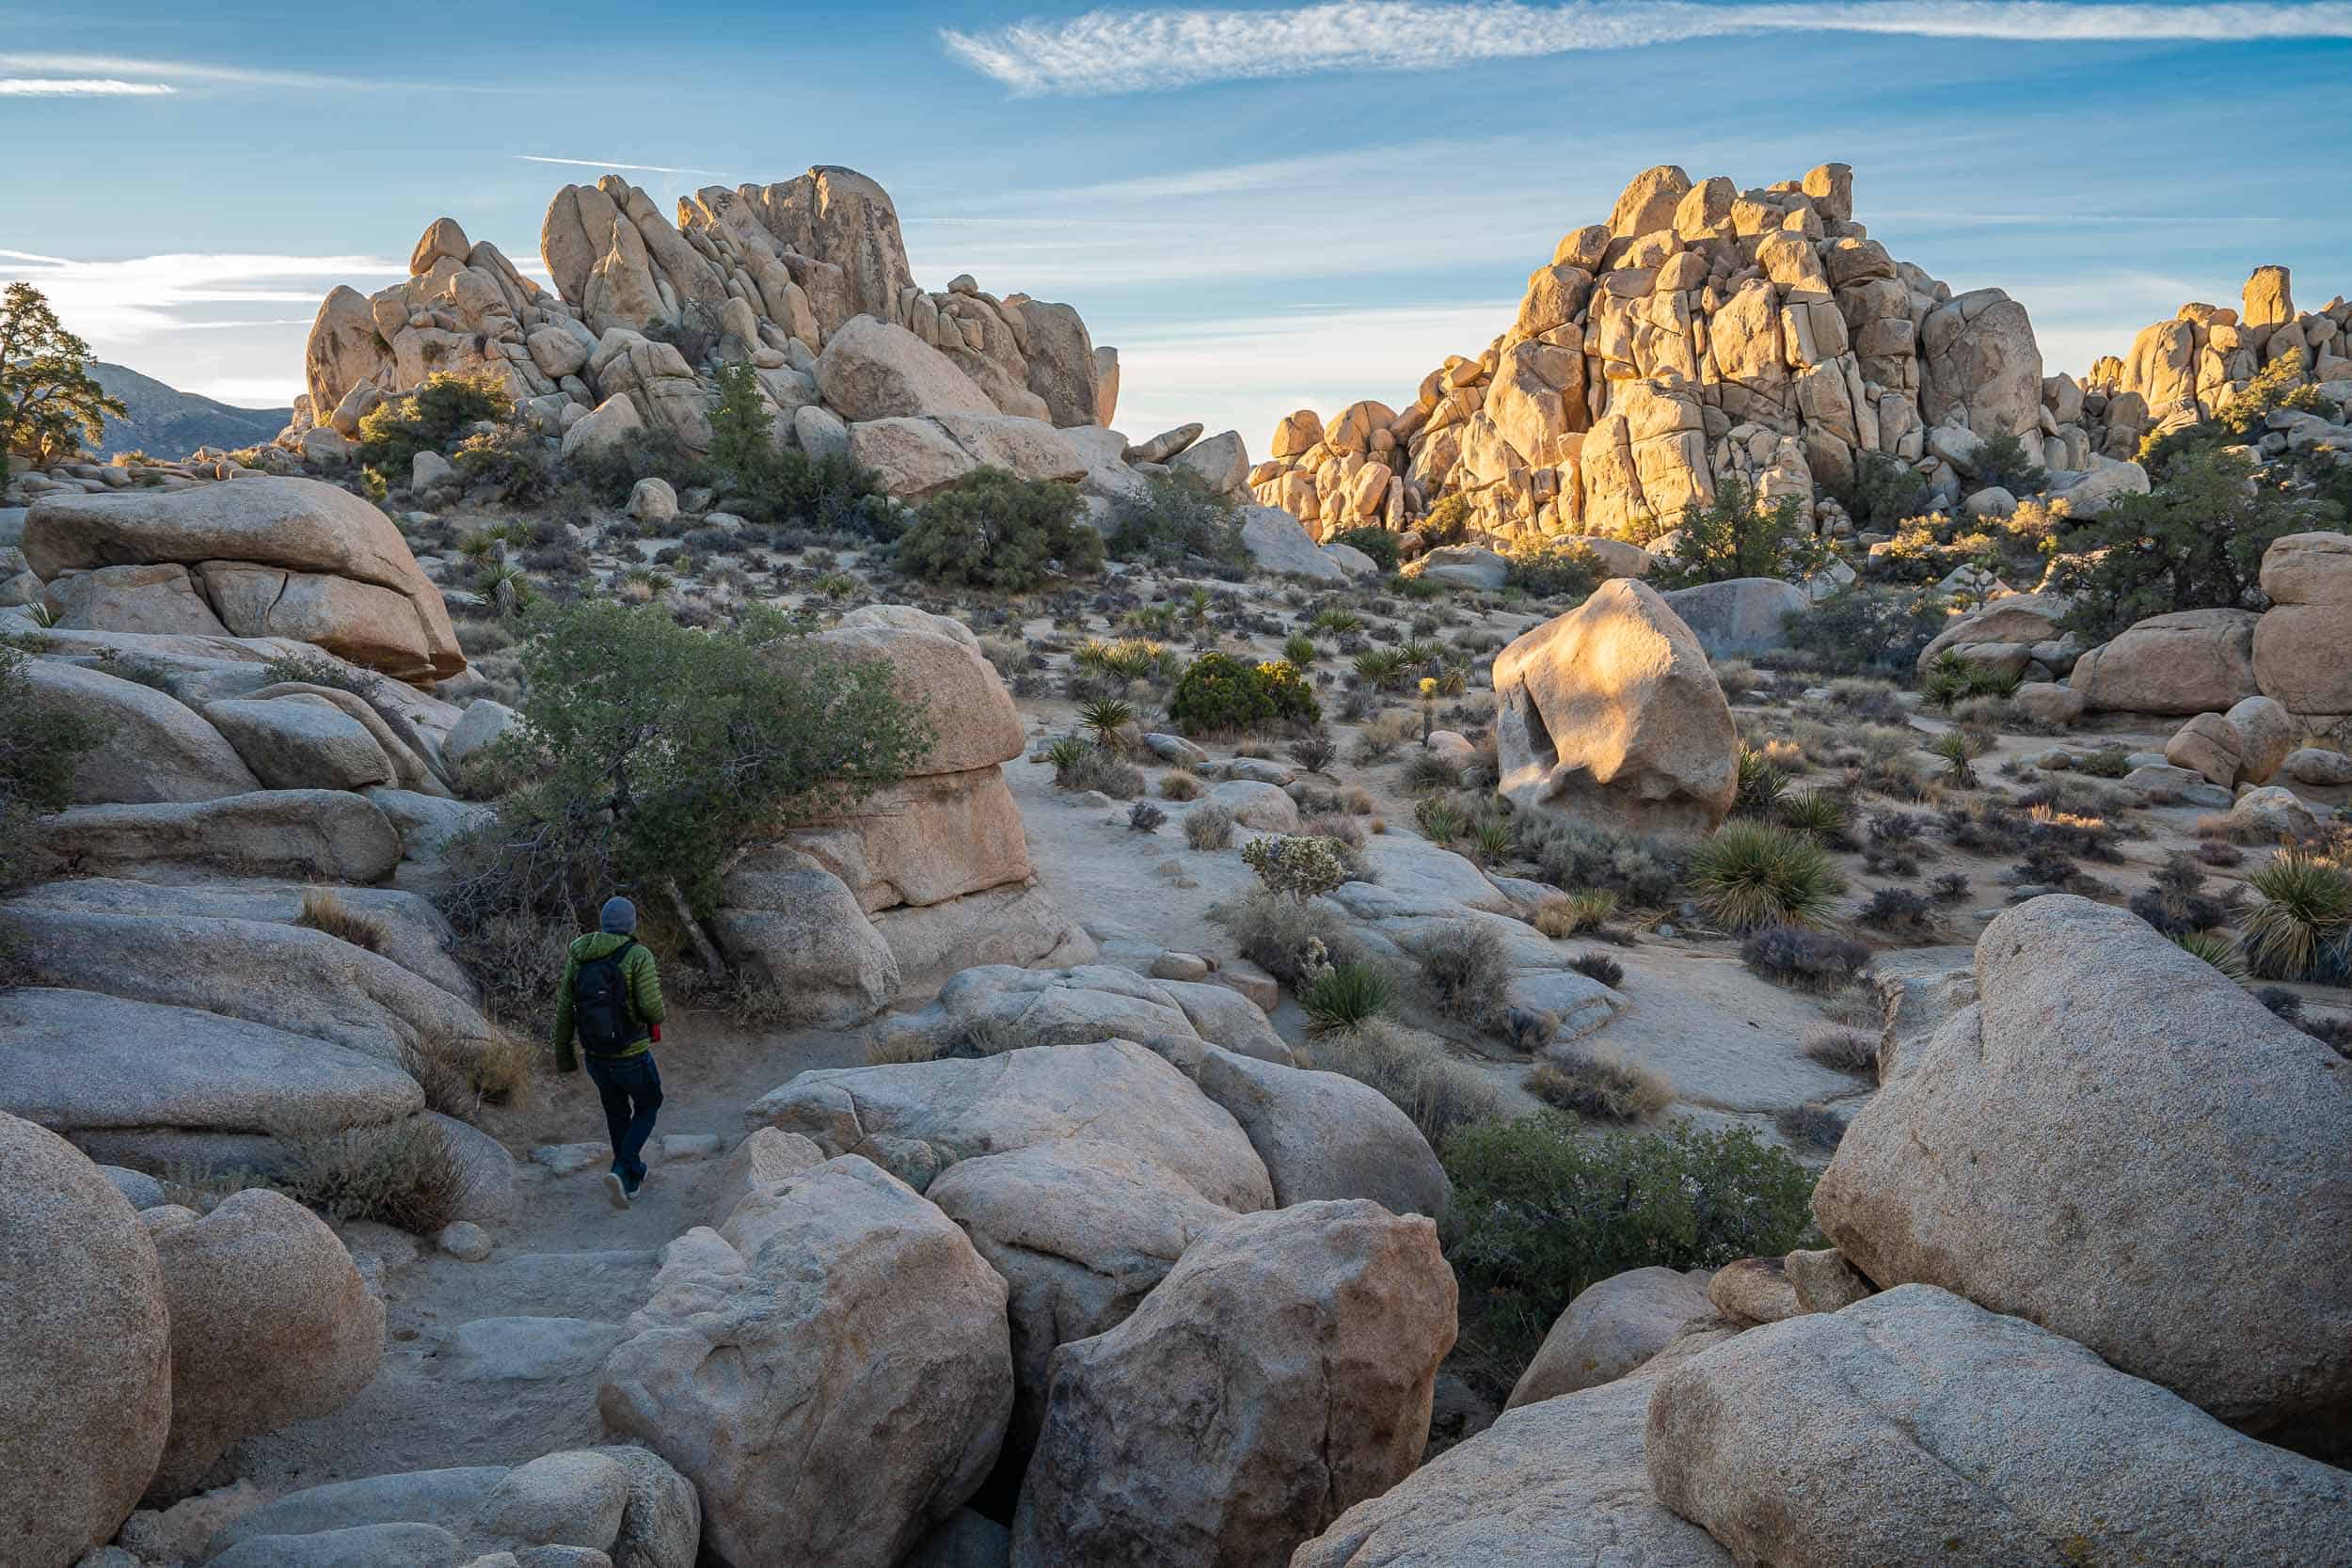 The best hikes in Joshua Tree National Park including easy walks like Hidden Valley